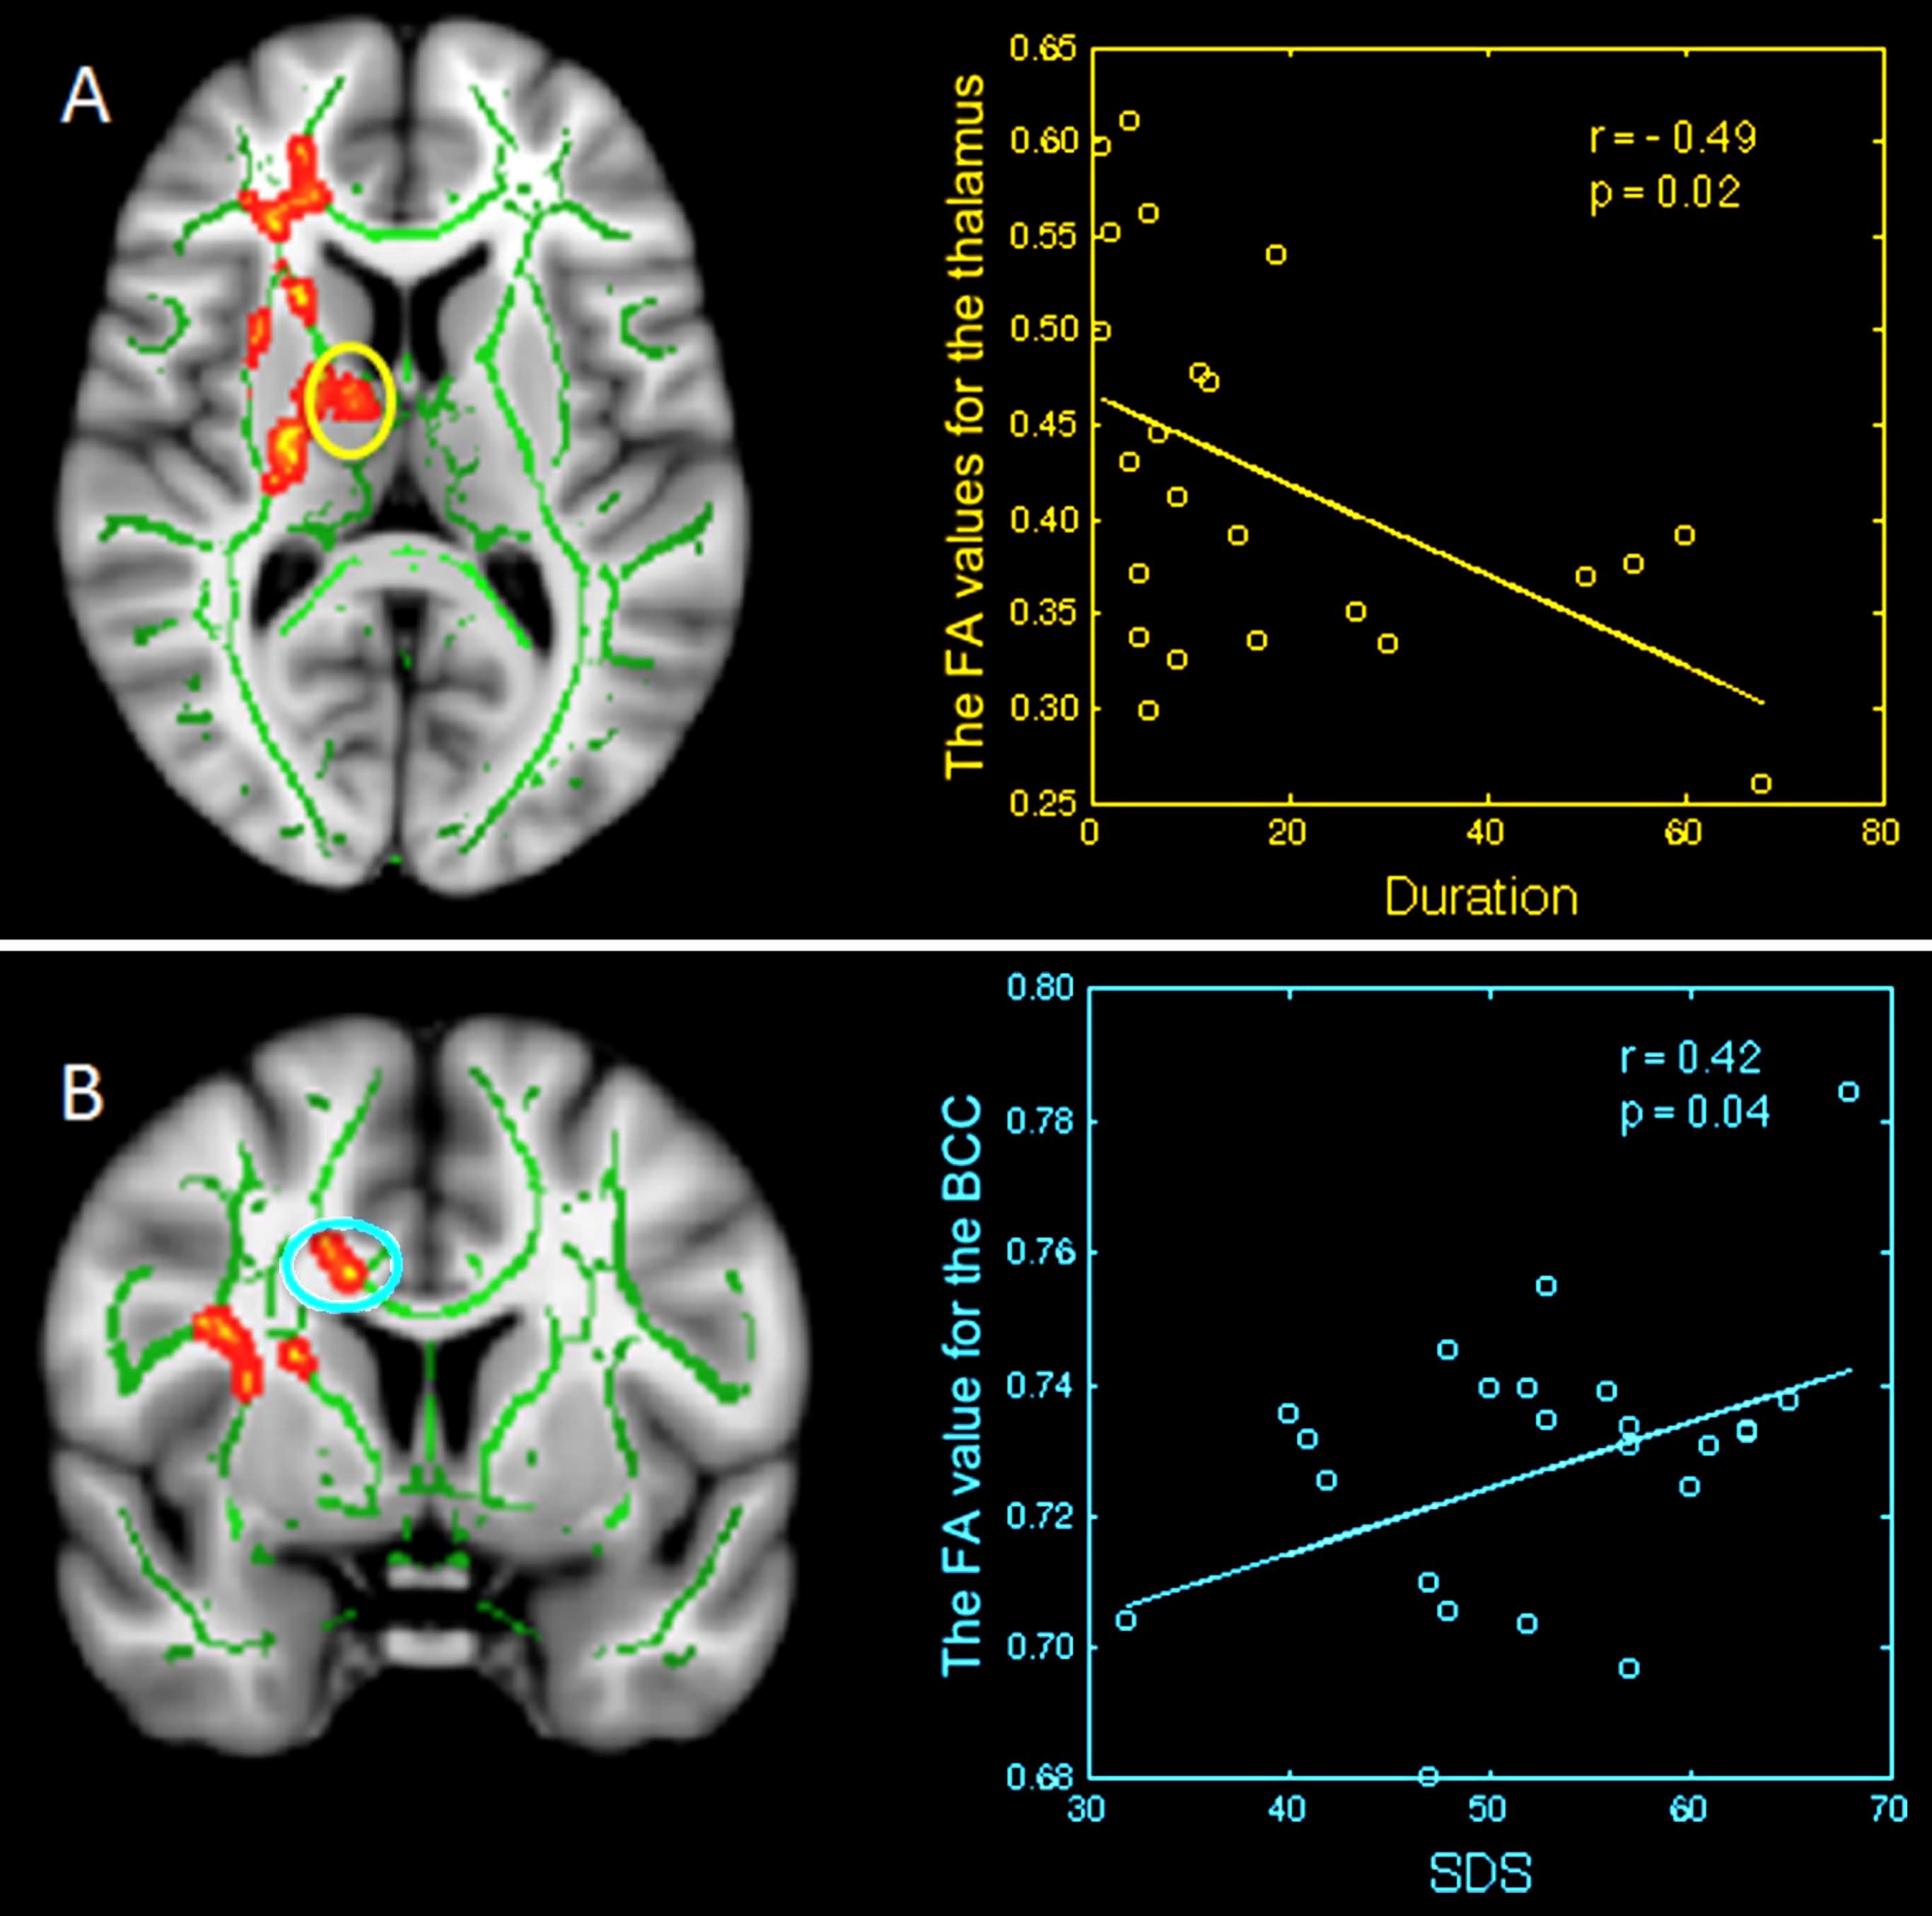 Image: Images on the left display region-of-interest maps of the relationship between mean FA and disease duration, and clinical features in primary insomnia, while the corresponding graphs are displayed on the right (Photo courtesy of RSNA).